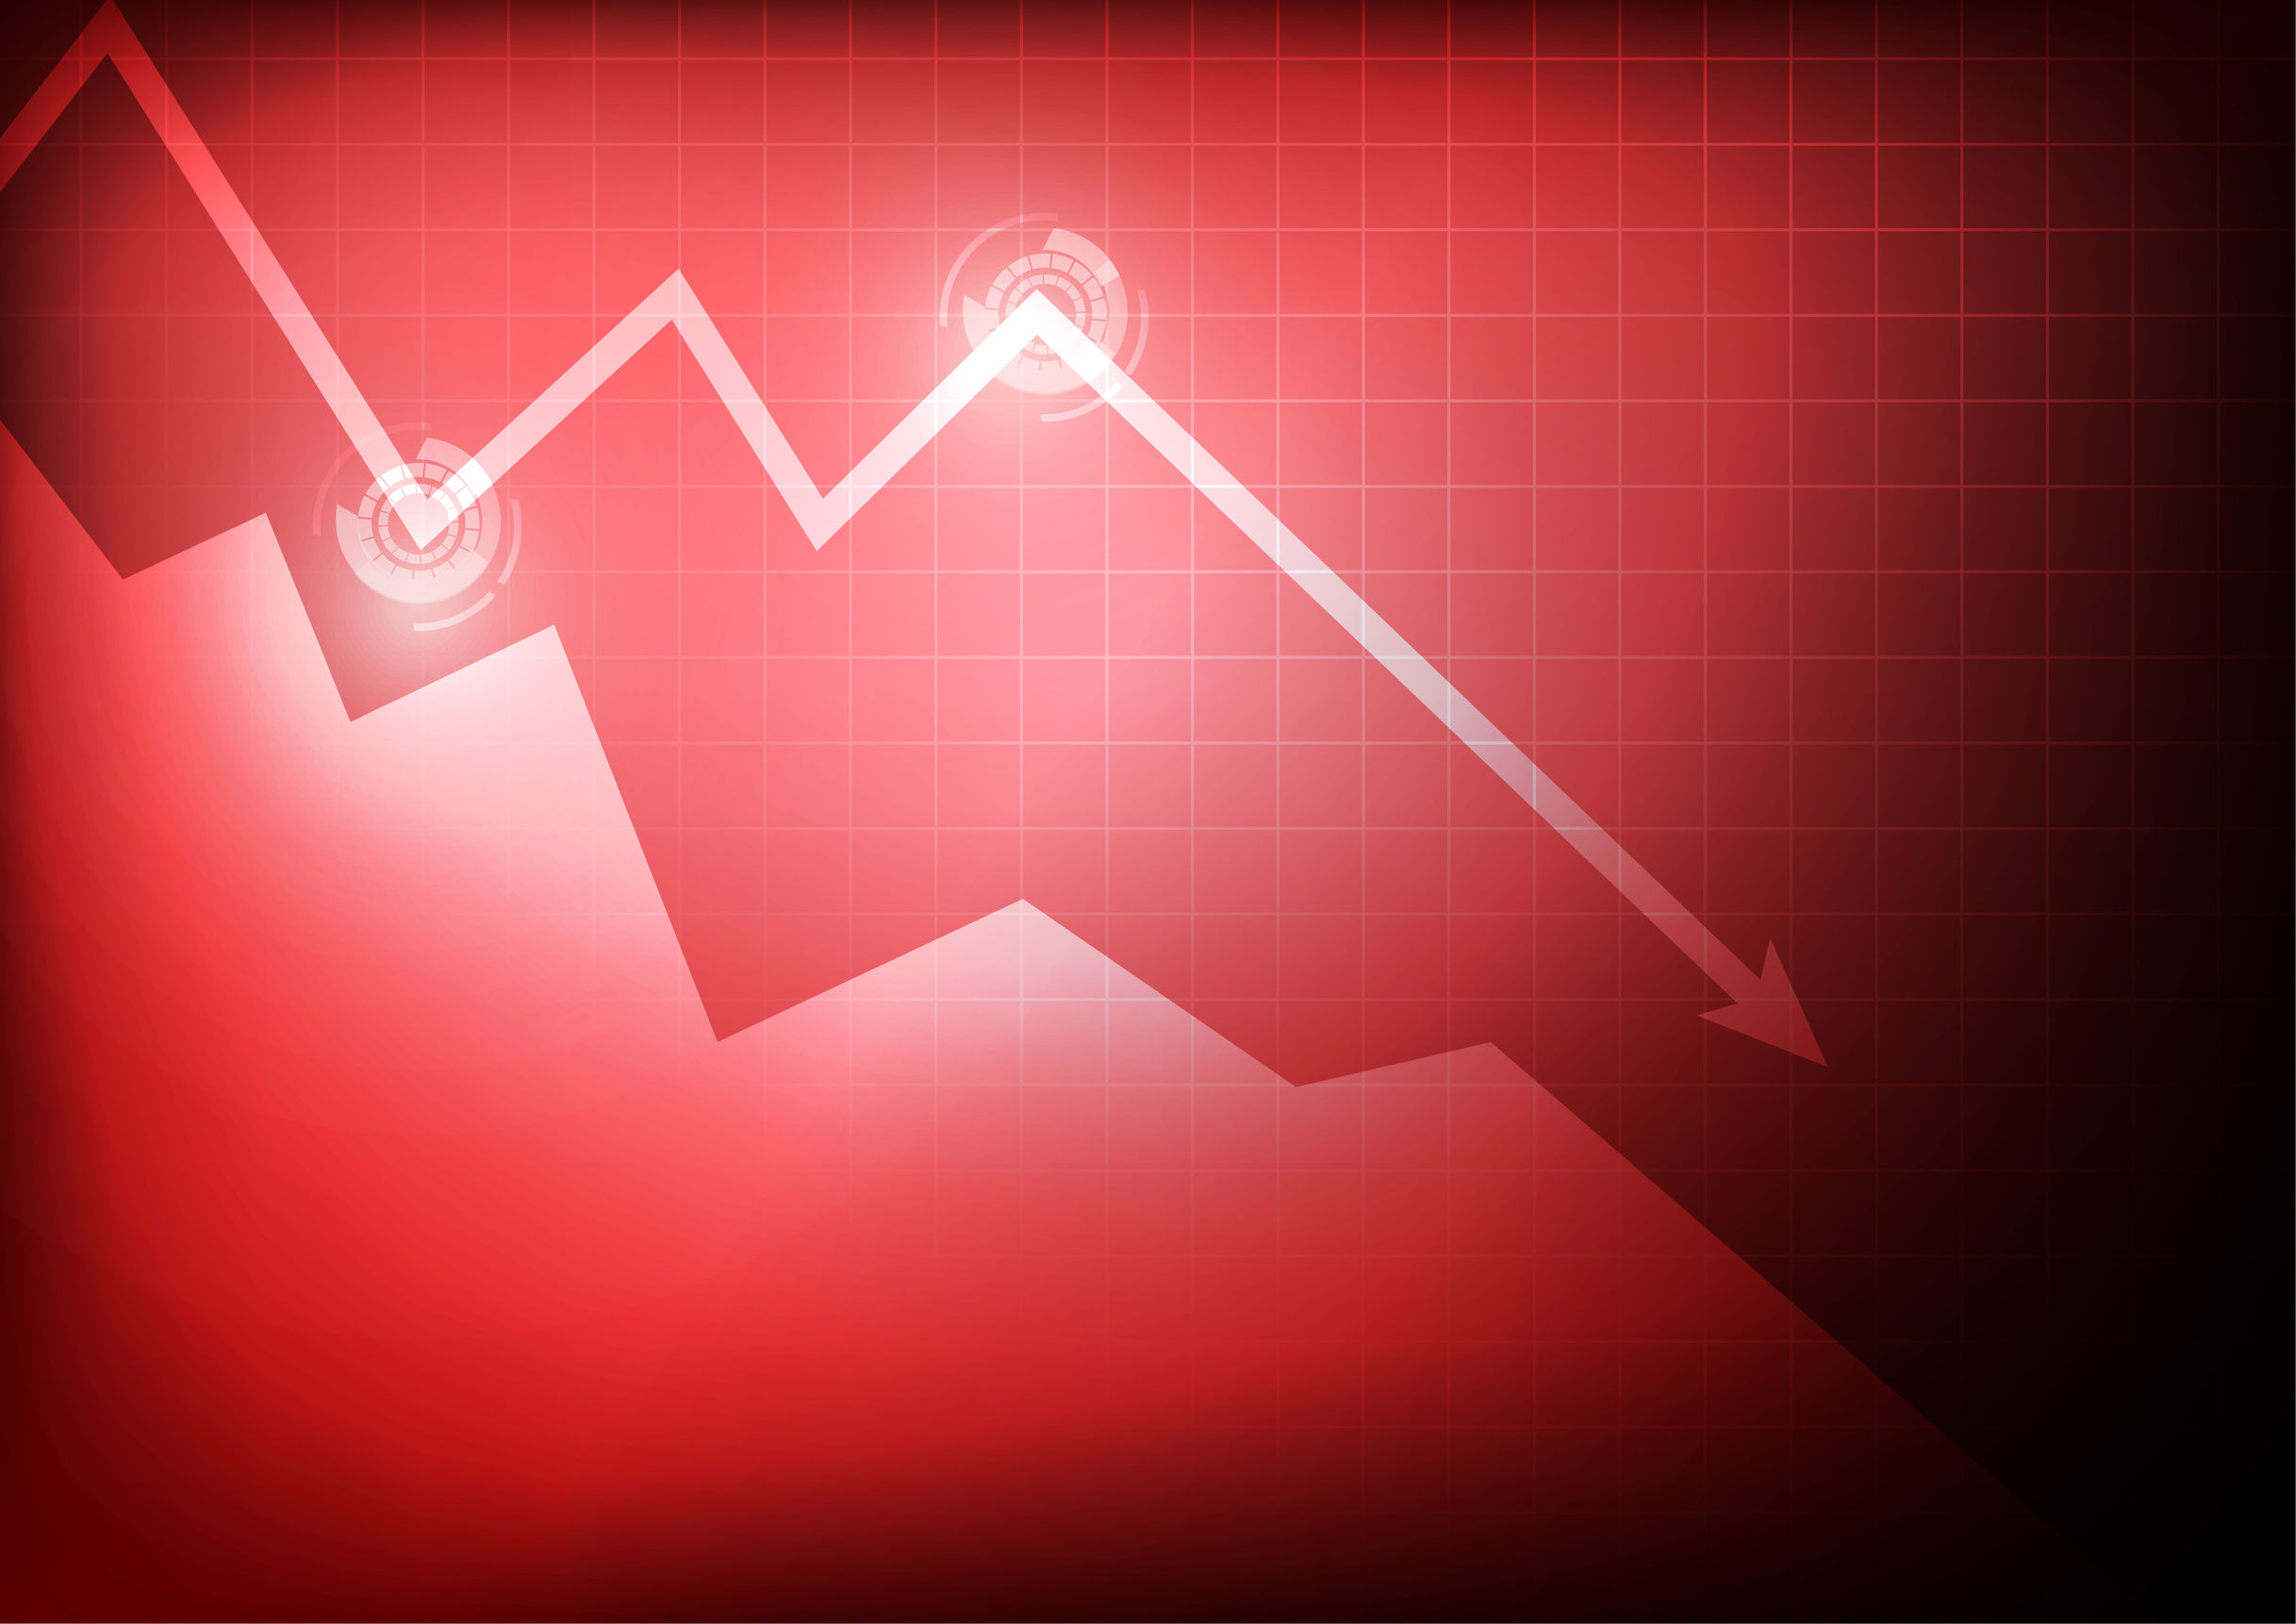 74300952 – vector : decreasing business graph on red background